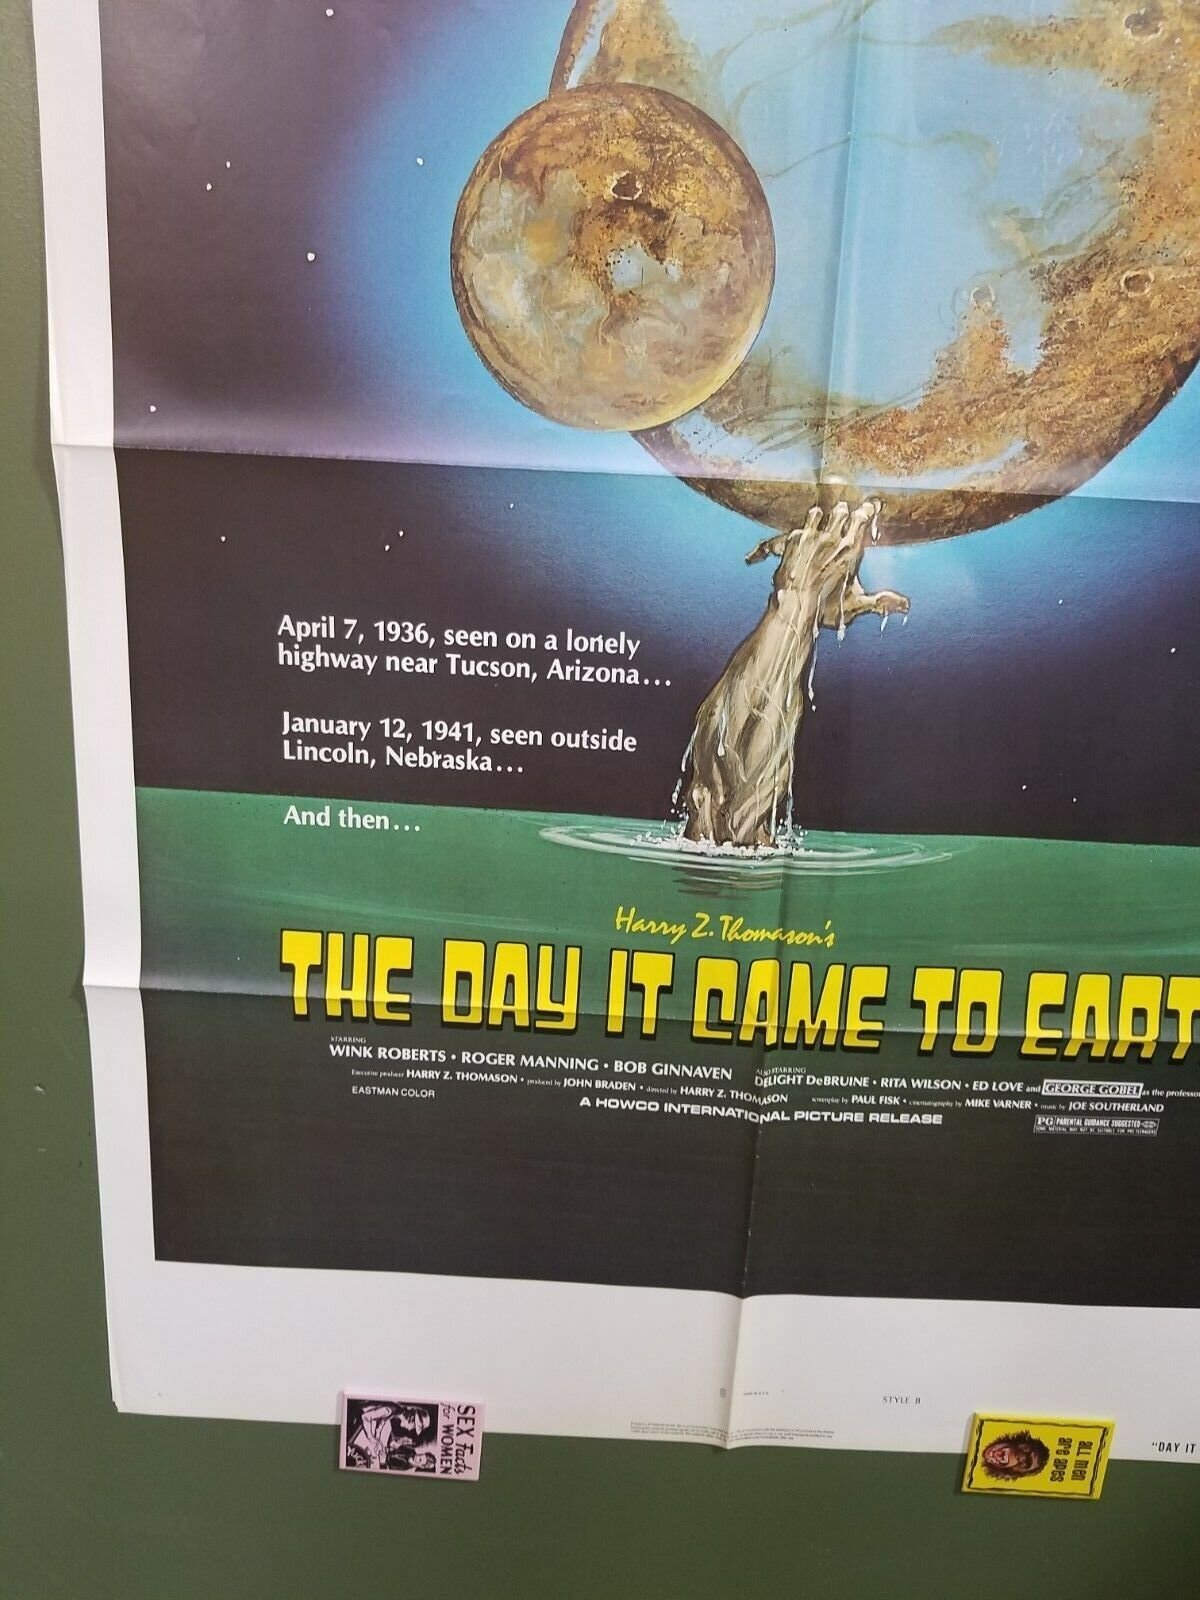 The day it came to Earth Wink Roberts movie poster 